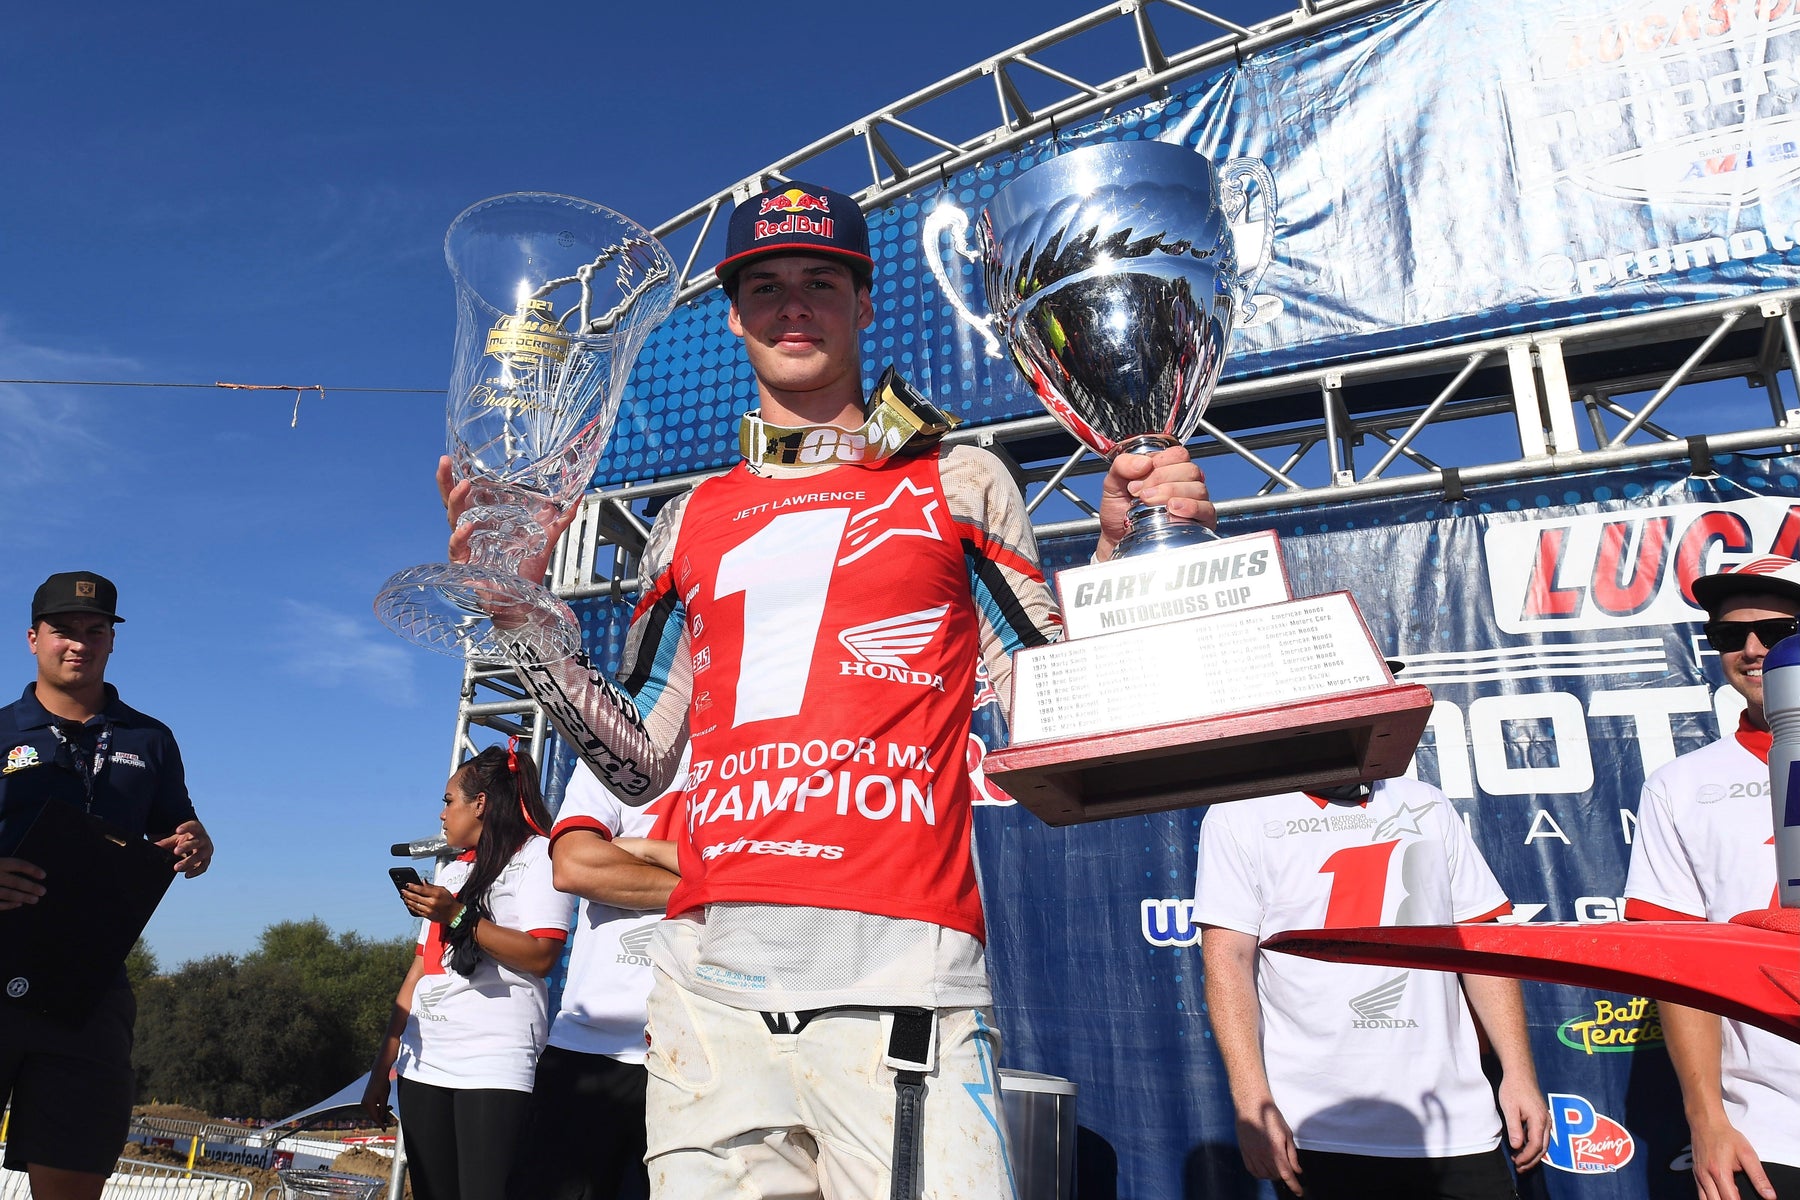 HIGH-FLYING JETT LAWRENCE IS THE 2021 AMA PRO MOTOCROSS 250MX CHAMPION